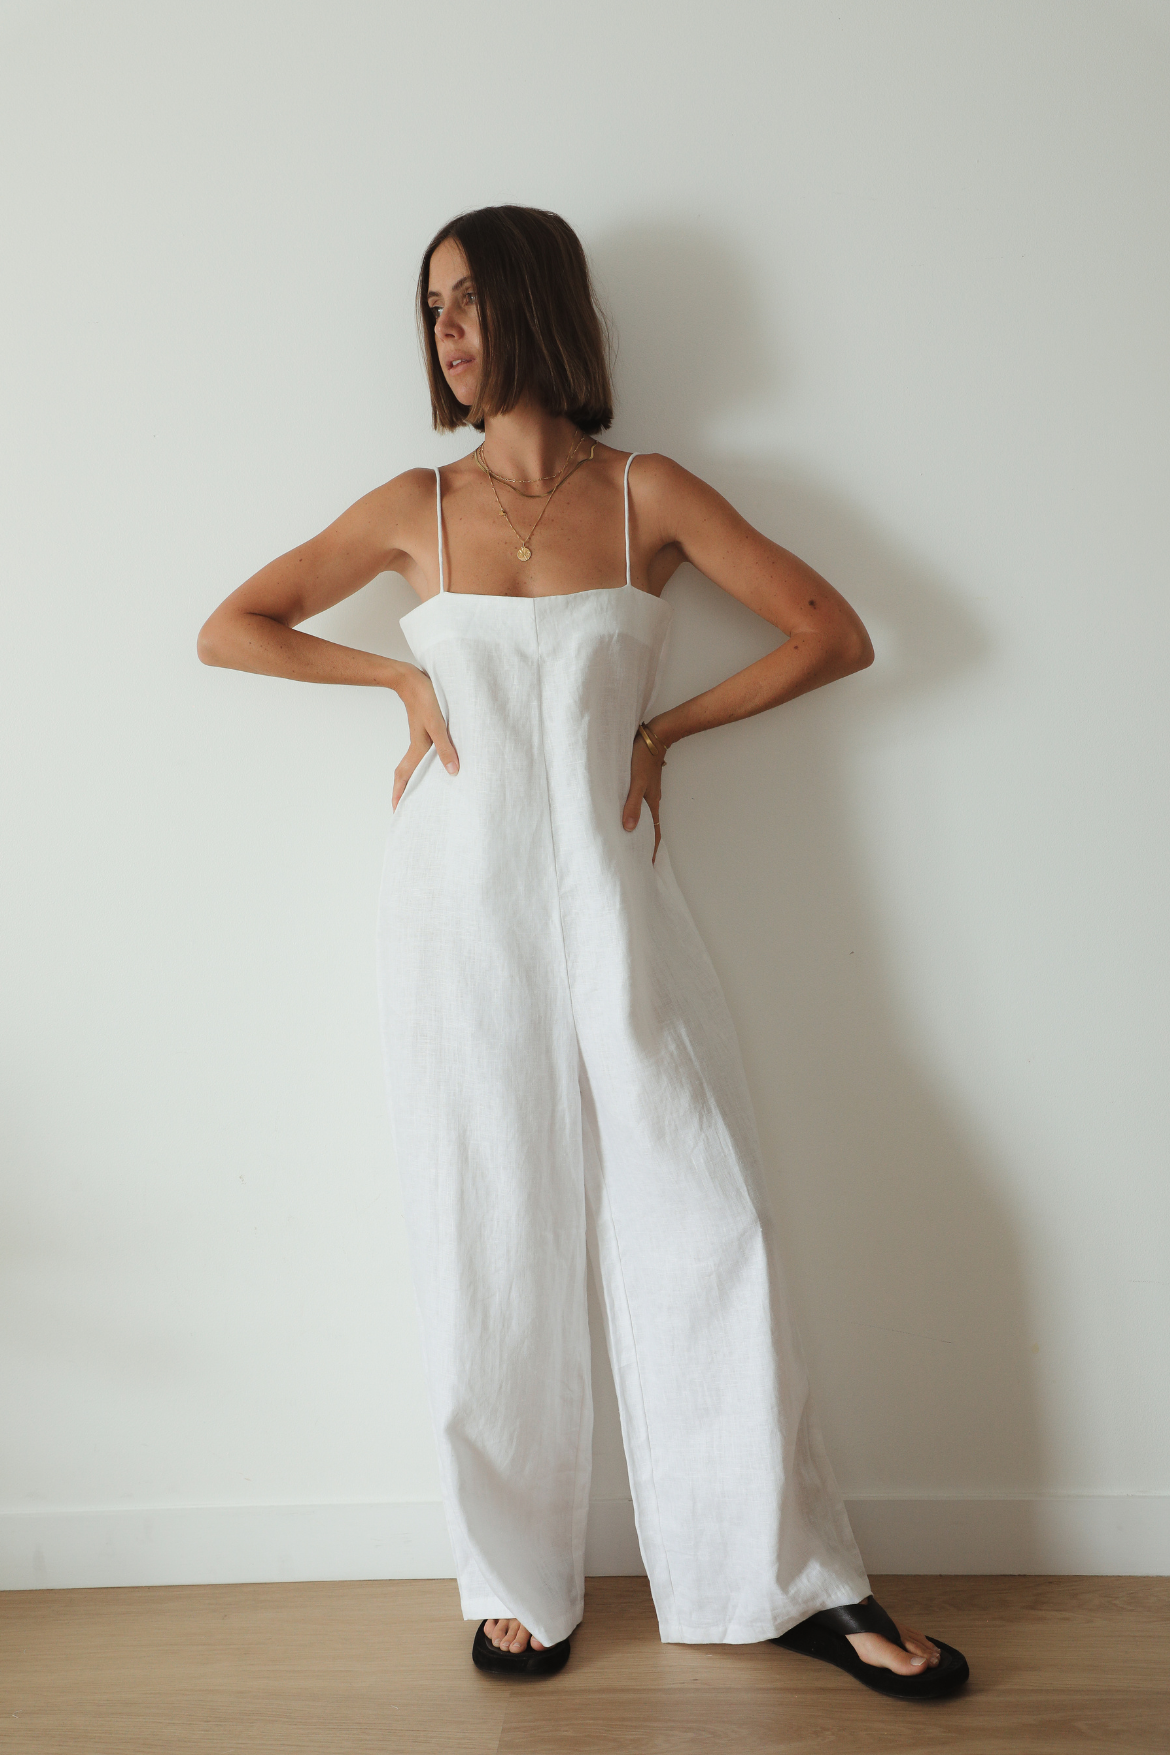 The Ease Iris Jumpsuit - White linen jumpsuit with spaghetti straps, loose fit design with long leg